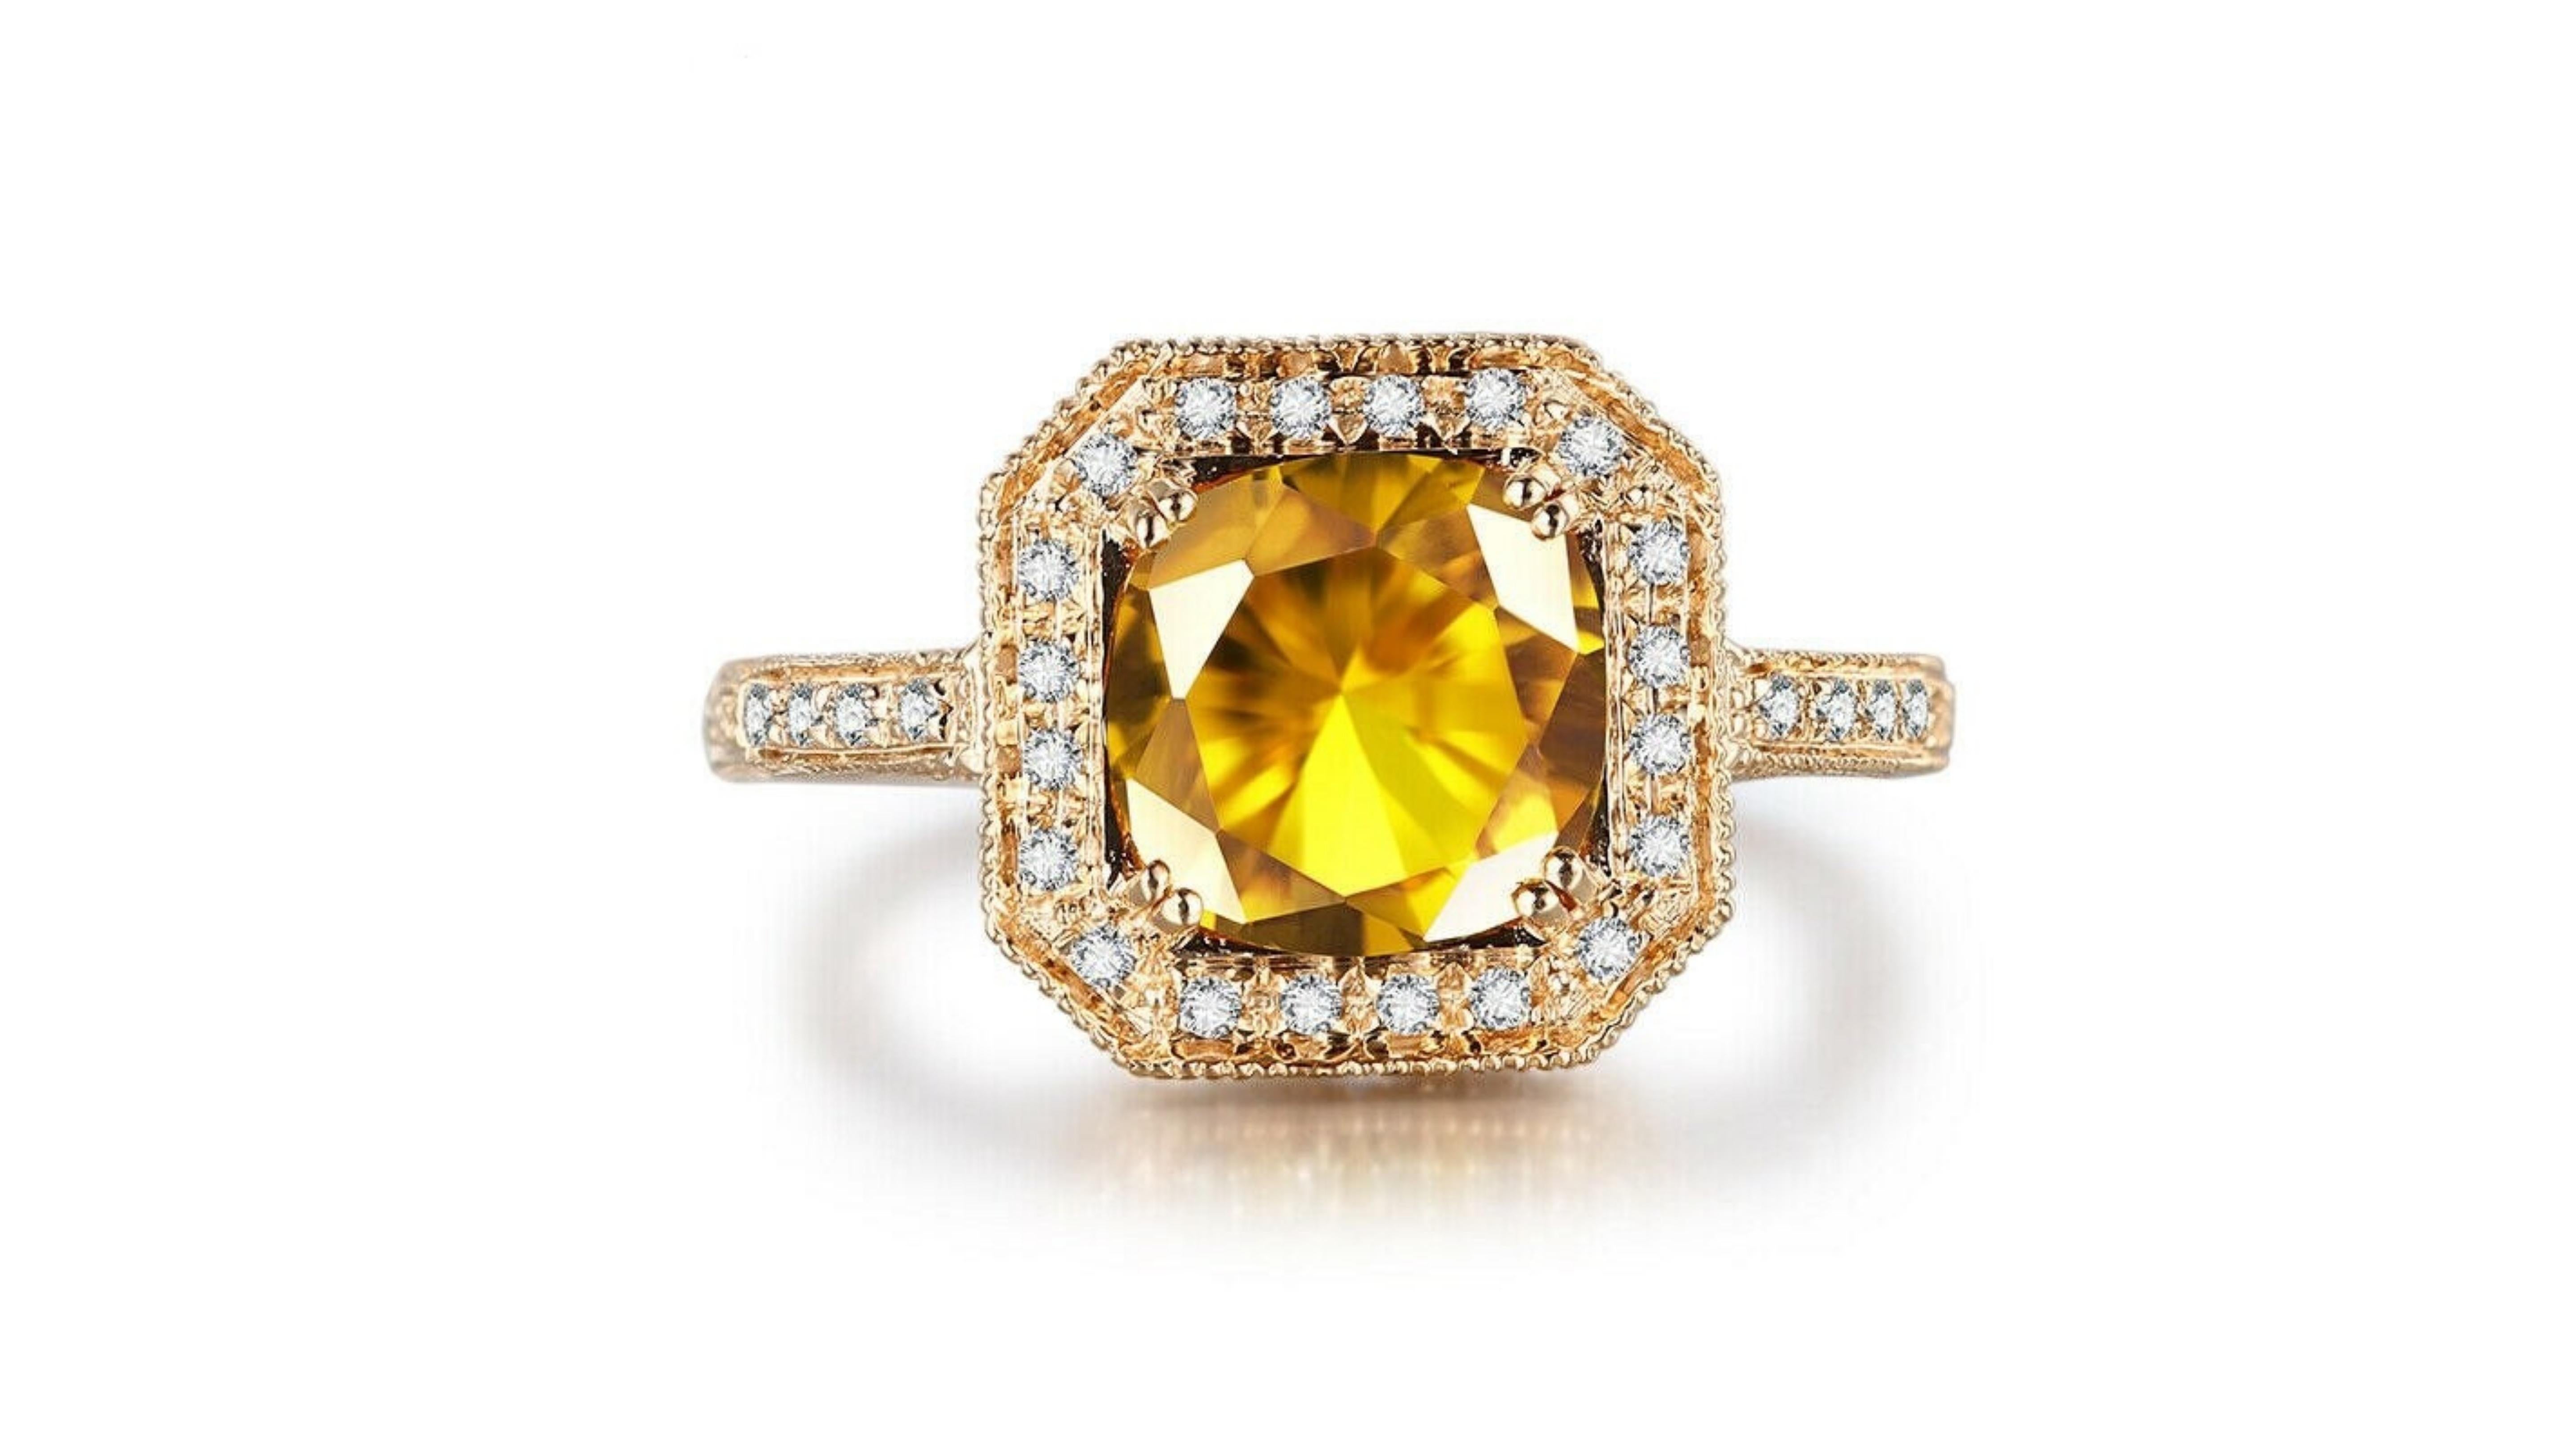 3 Carat Citrine Ring 14 Karat Yellow Gold with 28 White Diamonds in this very detailed design  as you can see in  the band. 

Citrine is the yellow variety of quartz, and its name comes from the Old French word for lemon. Its warm colour is said to